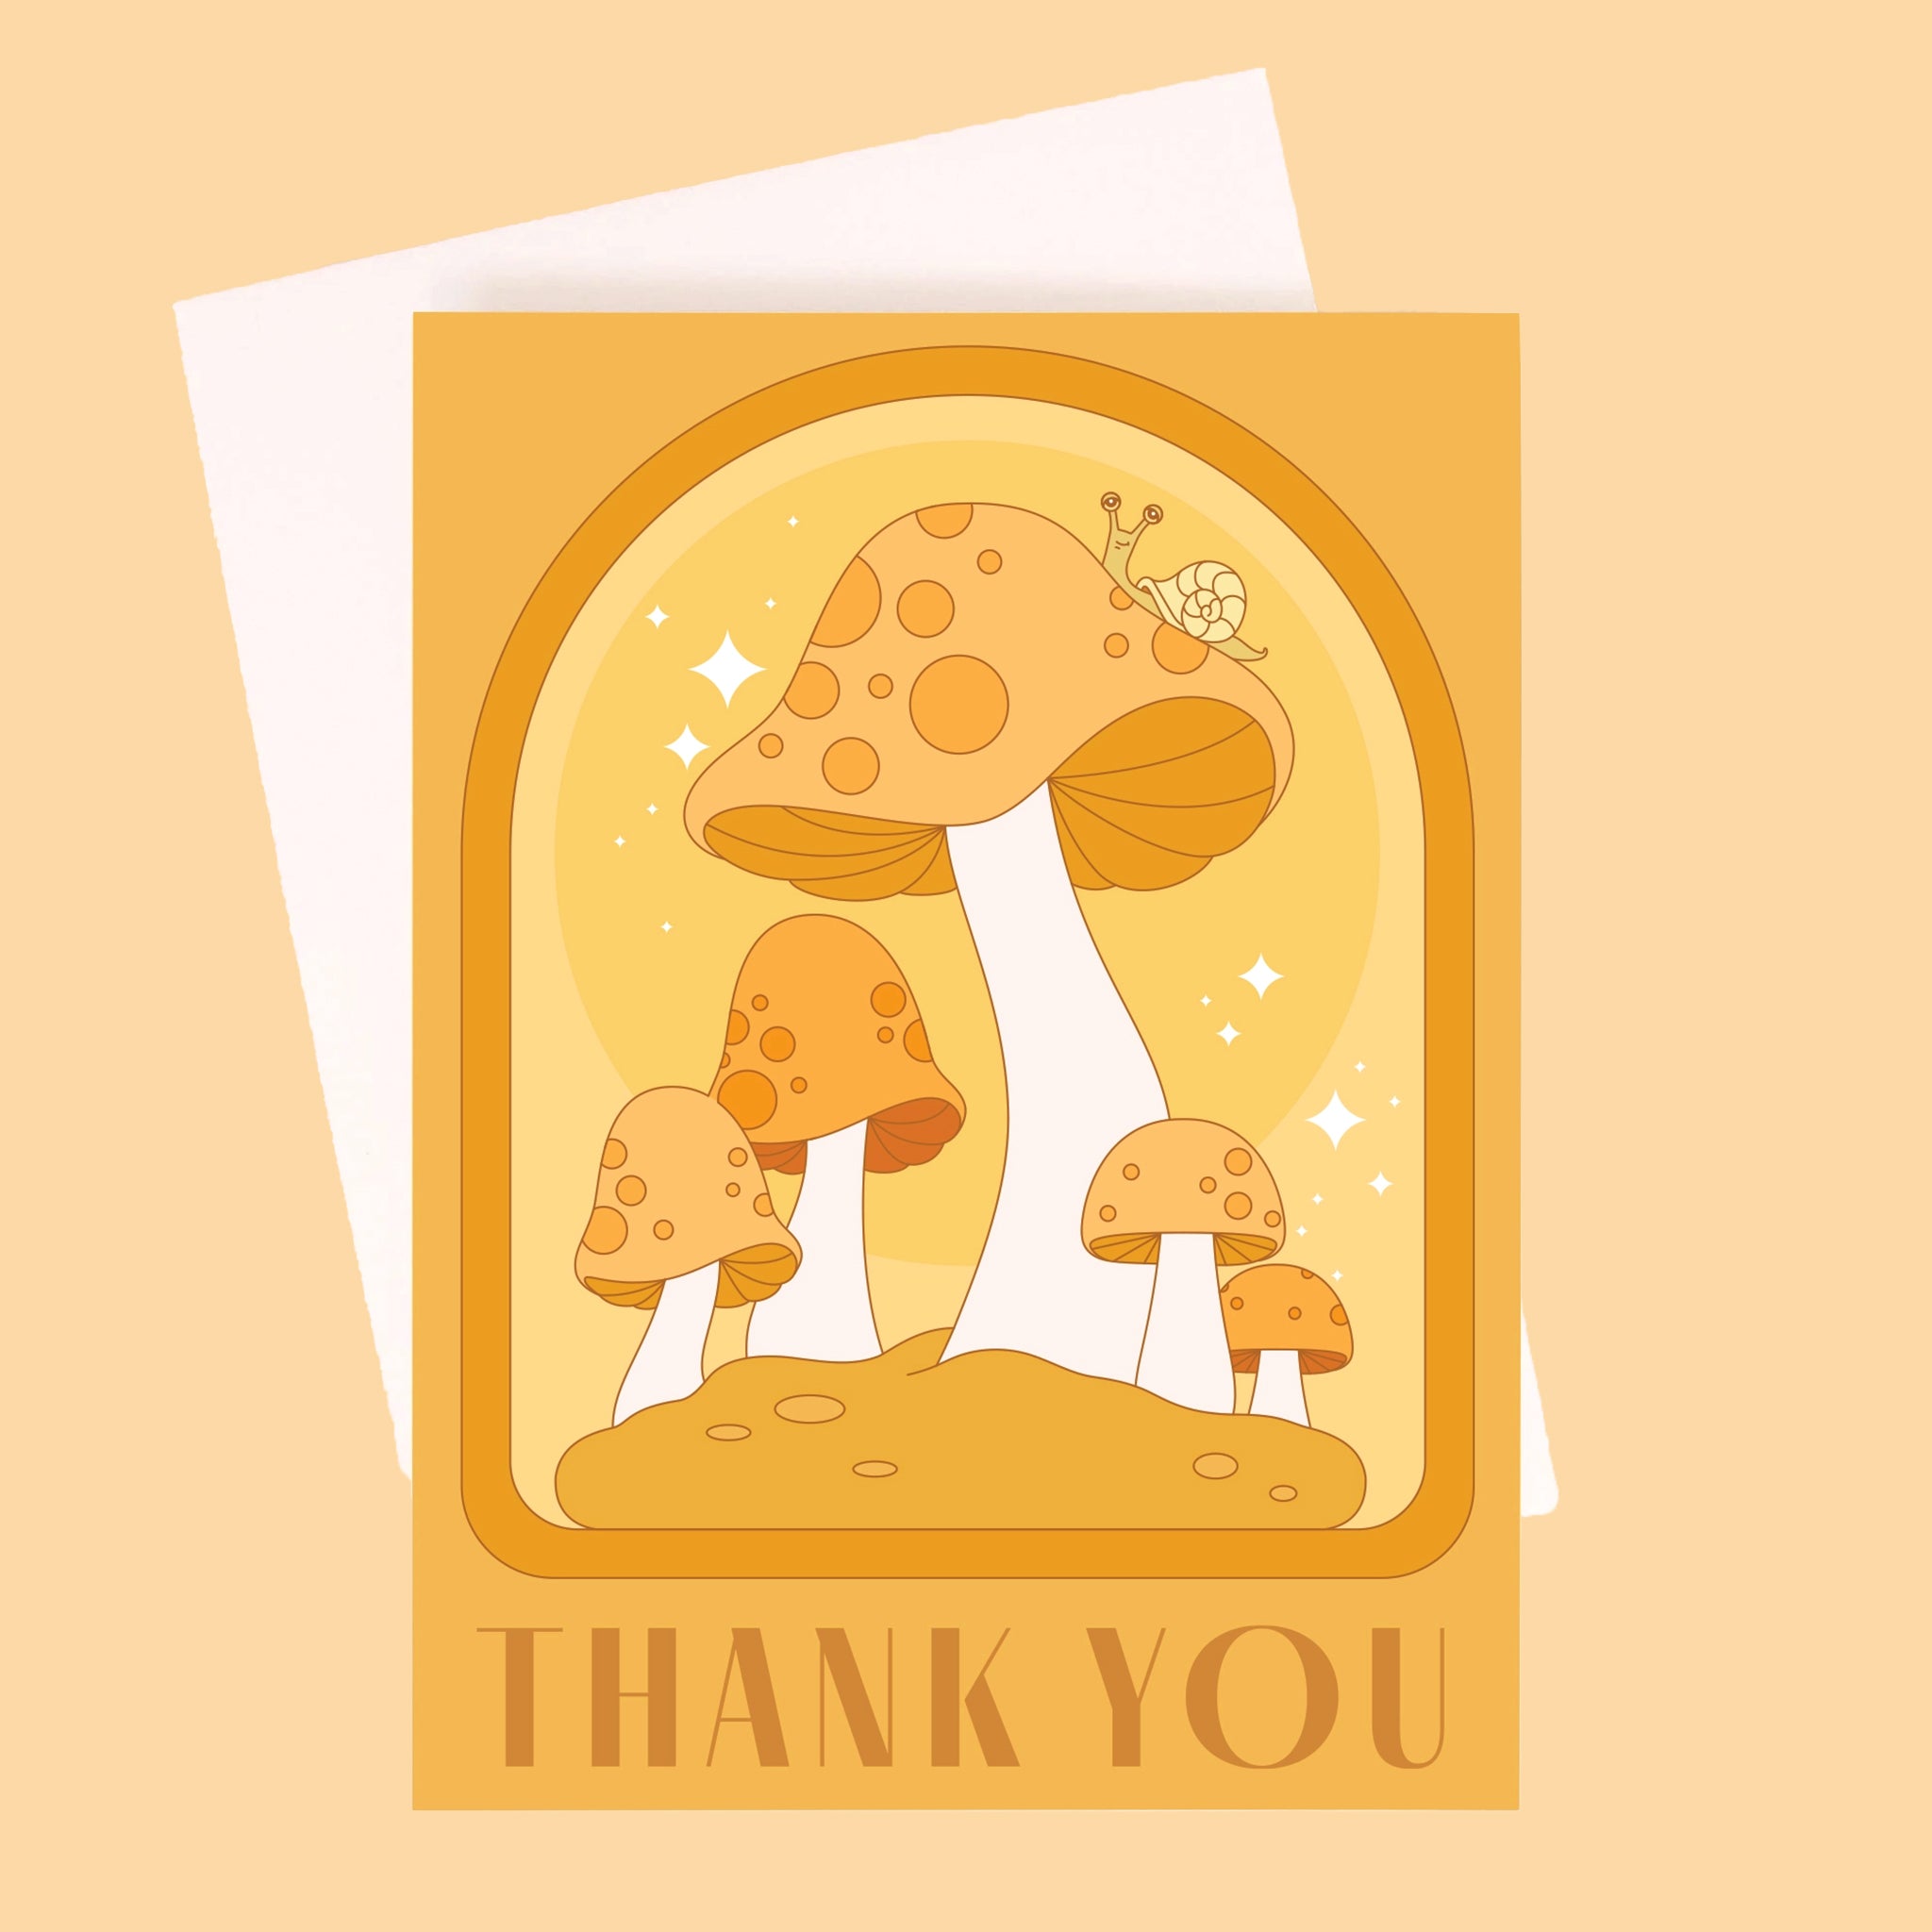 On a yellow background is an orange greeting card with an arched design, mushroom illustrations with a little snail on top of the largest one and text along the bottom that reads, "Thank You".